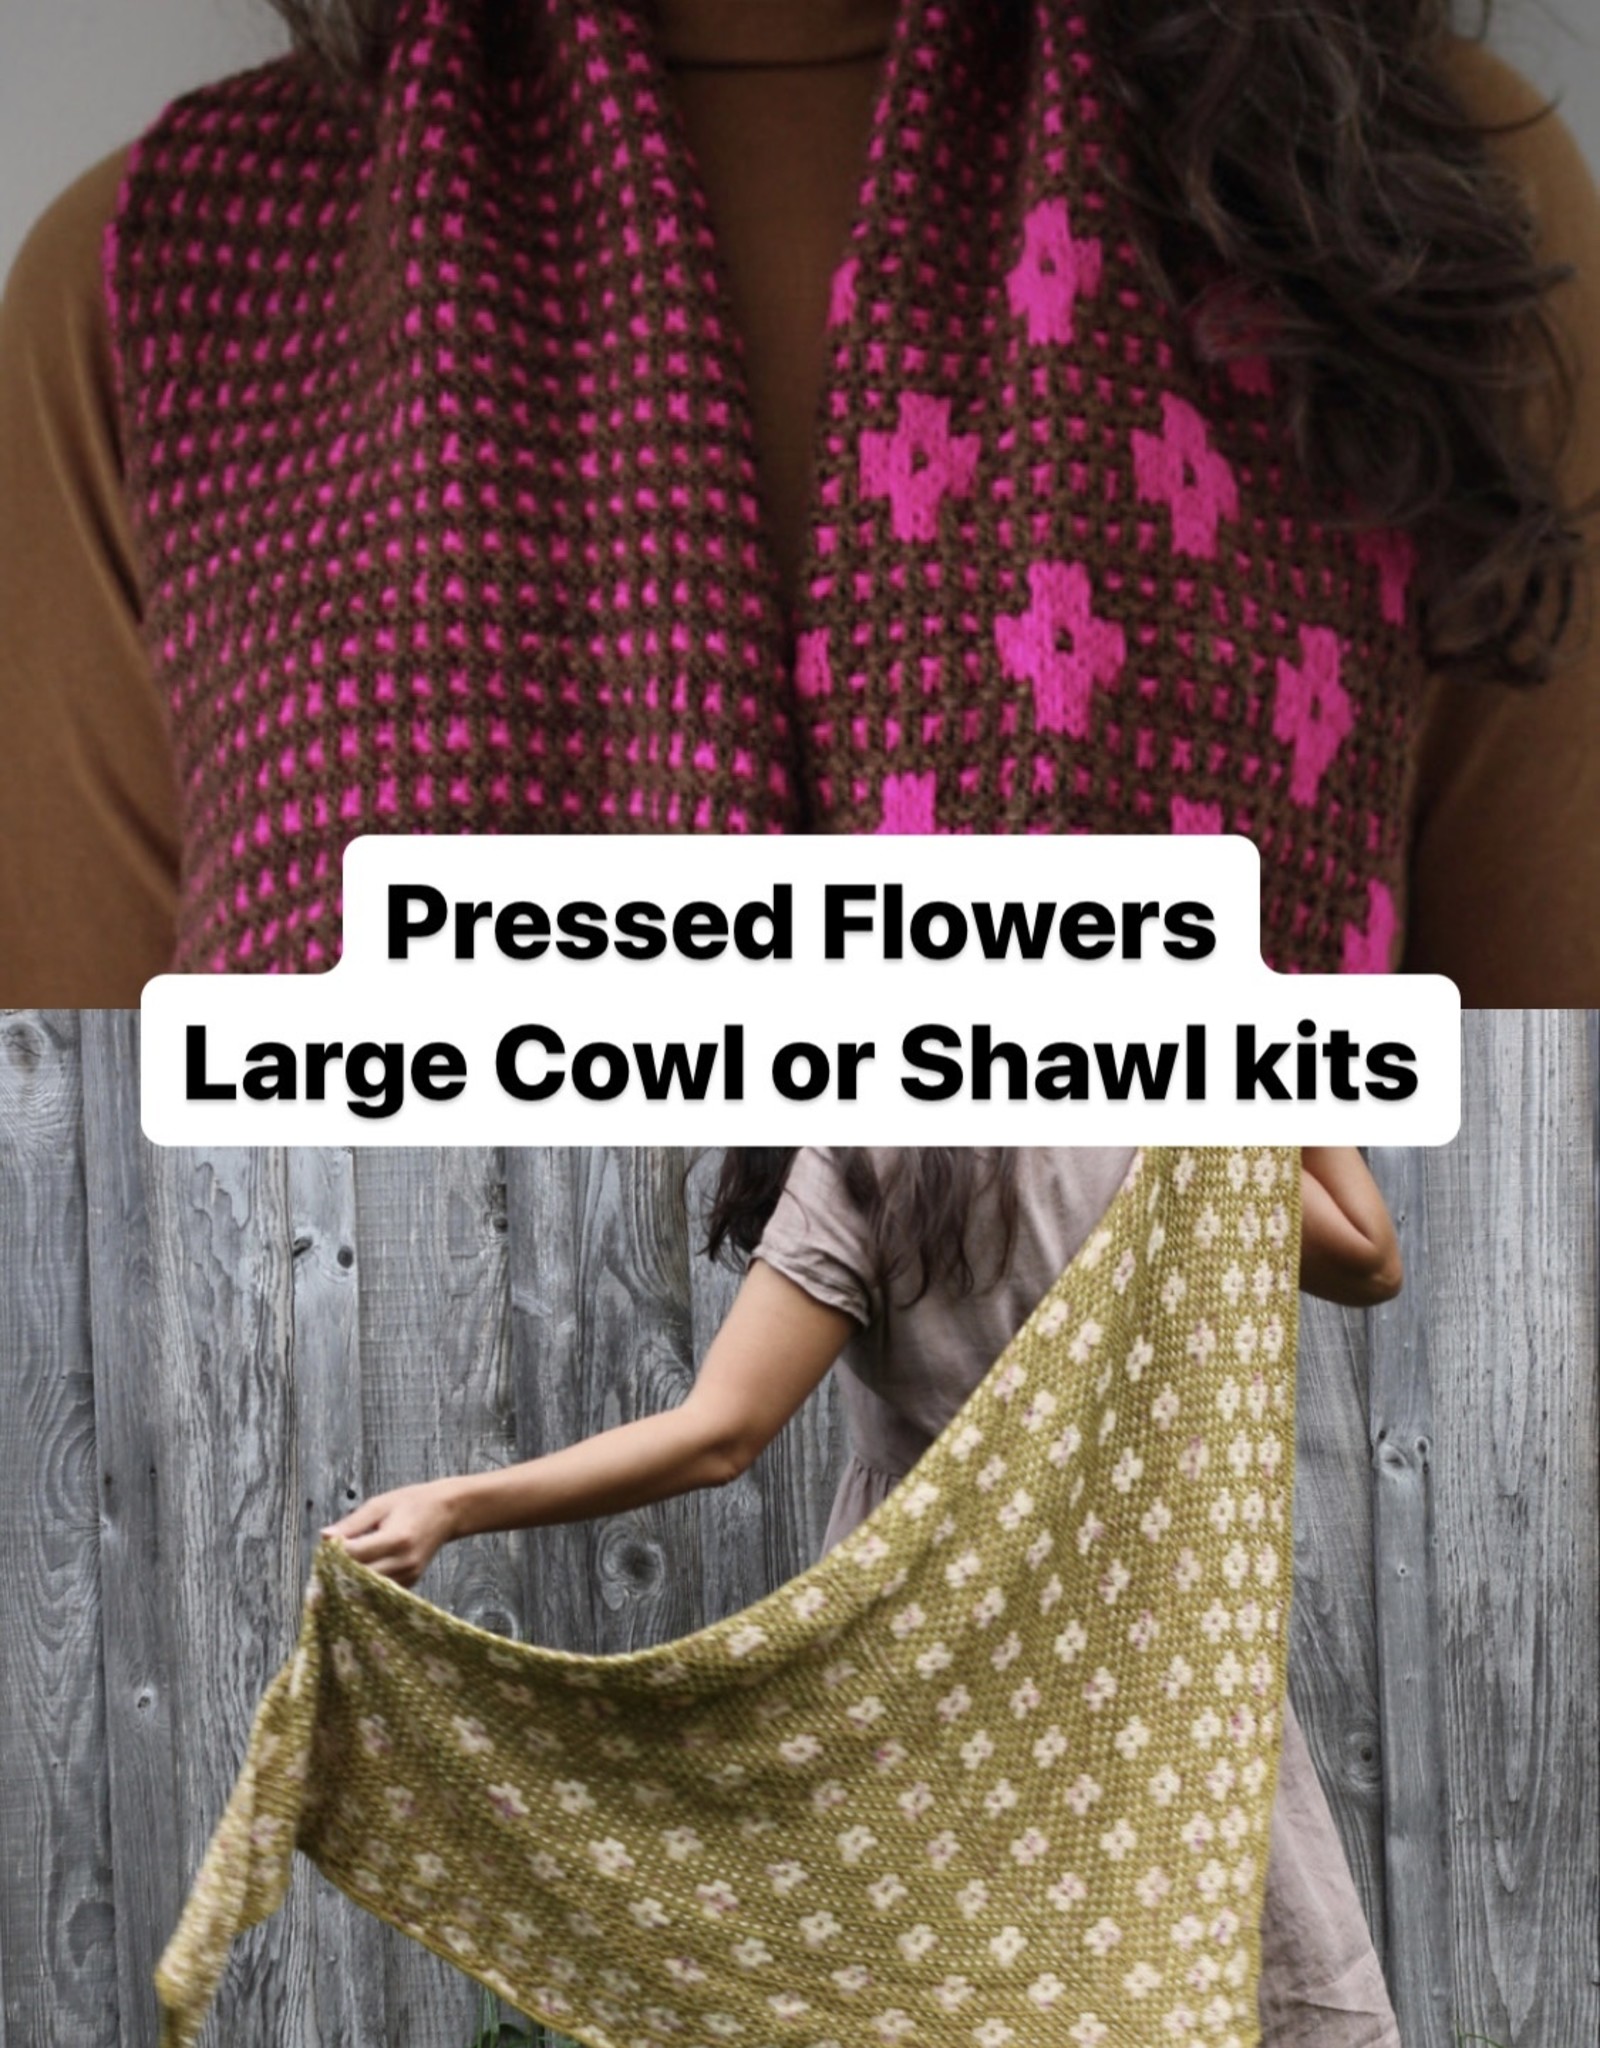 Pressed Flowers Shawl or Large Cowl Kits